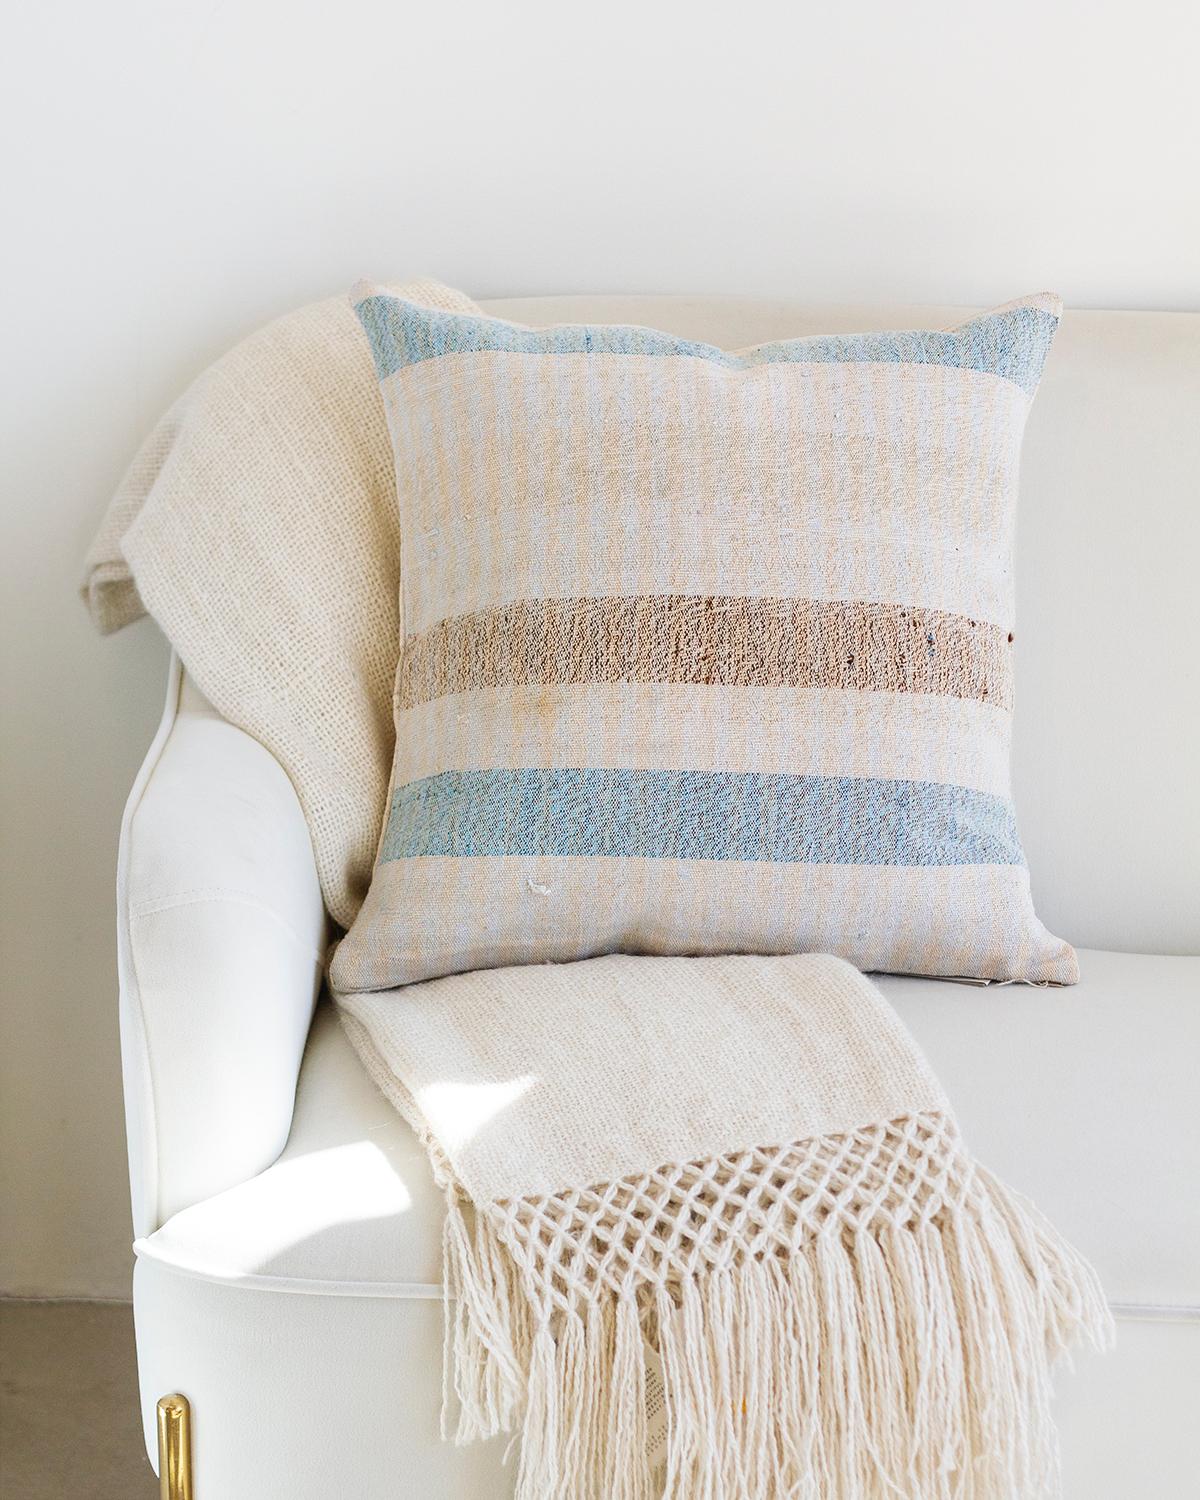 One of a kind vintage linen throw pillows to beautify your home. A hundred years ago these fabrics used to be cereal sacks in Northern Portugal. Now they get rediscovered and transformed into a rare collectible. This Matilde Blue Stripe Throw Pillow